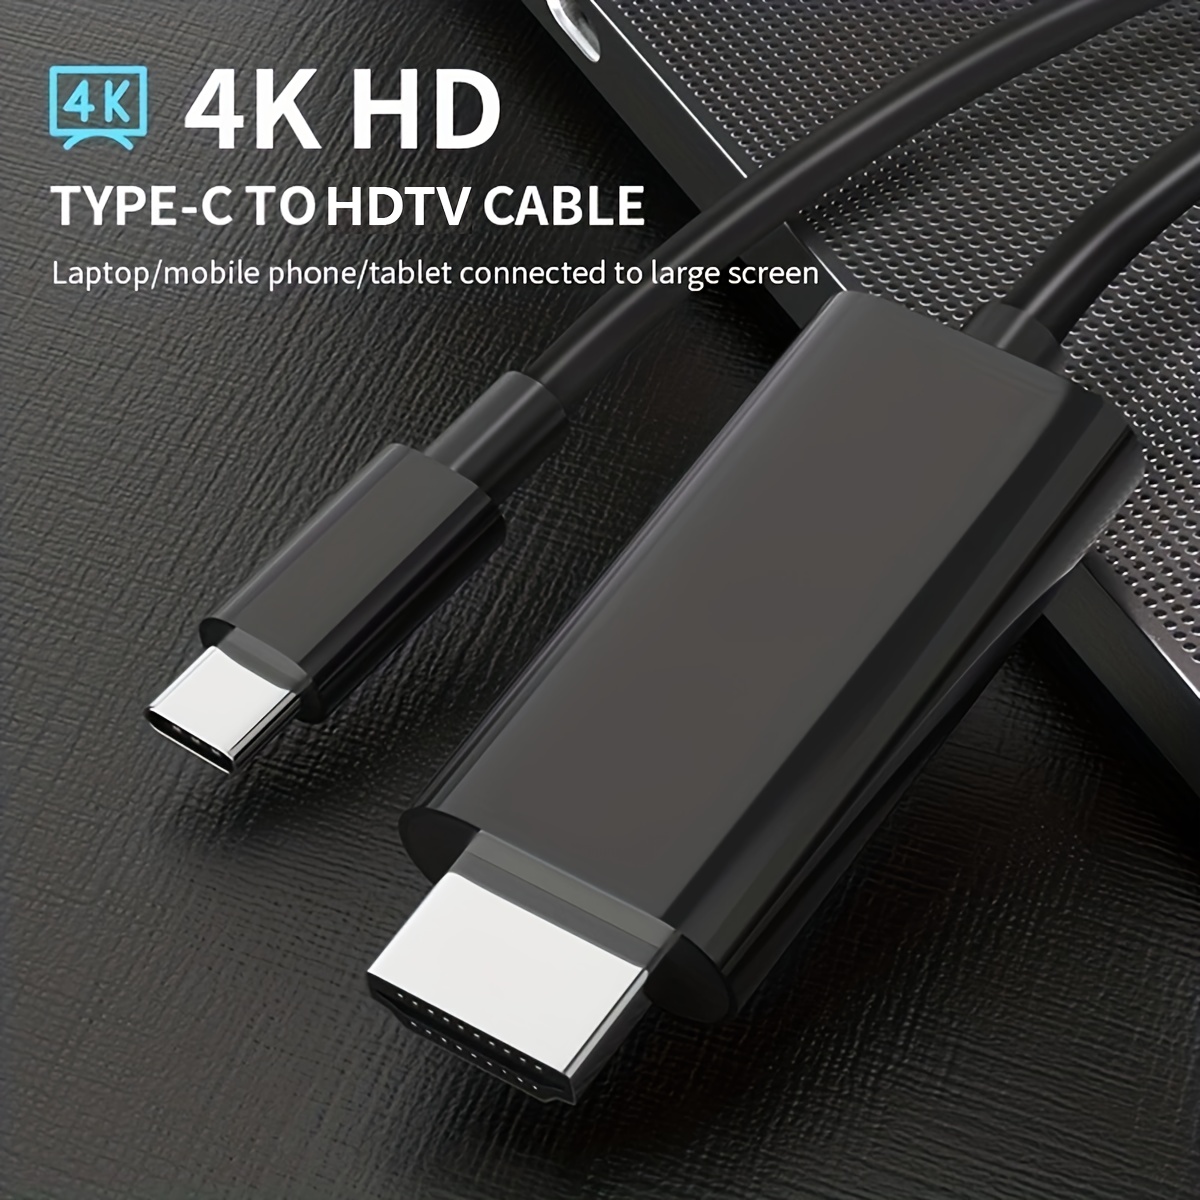 USB C to HDMI Adapter Cable 6Ft, Thunderbolt 3 to HDMI Cable for Home  Office, 4K Display Compatible for iPhone 15 Pro Max, MacBook Pro/Air 2023